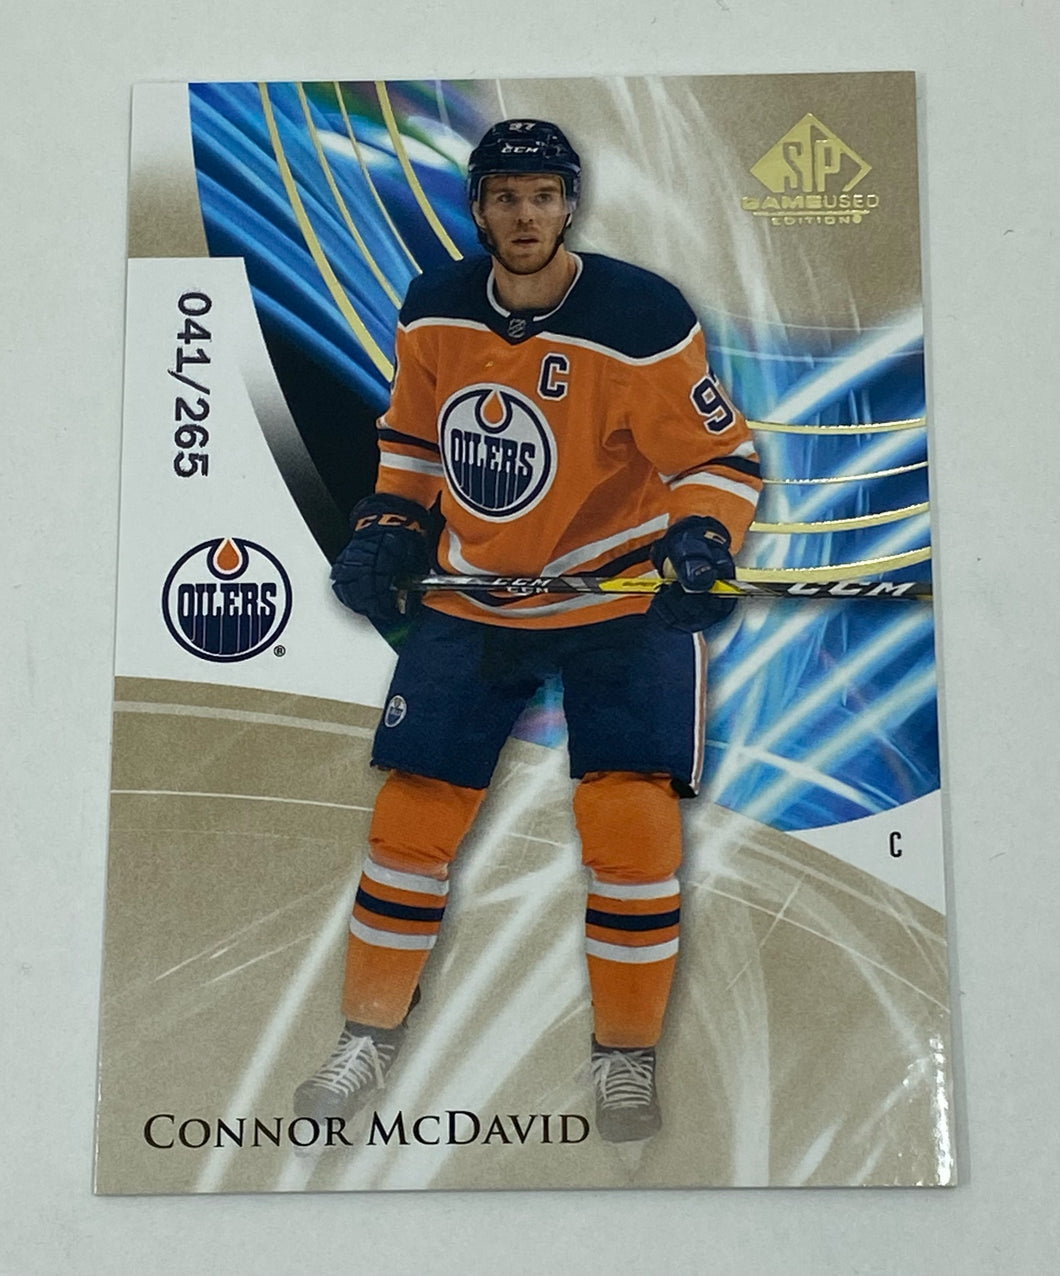 2020-21 SP Game Used Connor McDavid /265